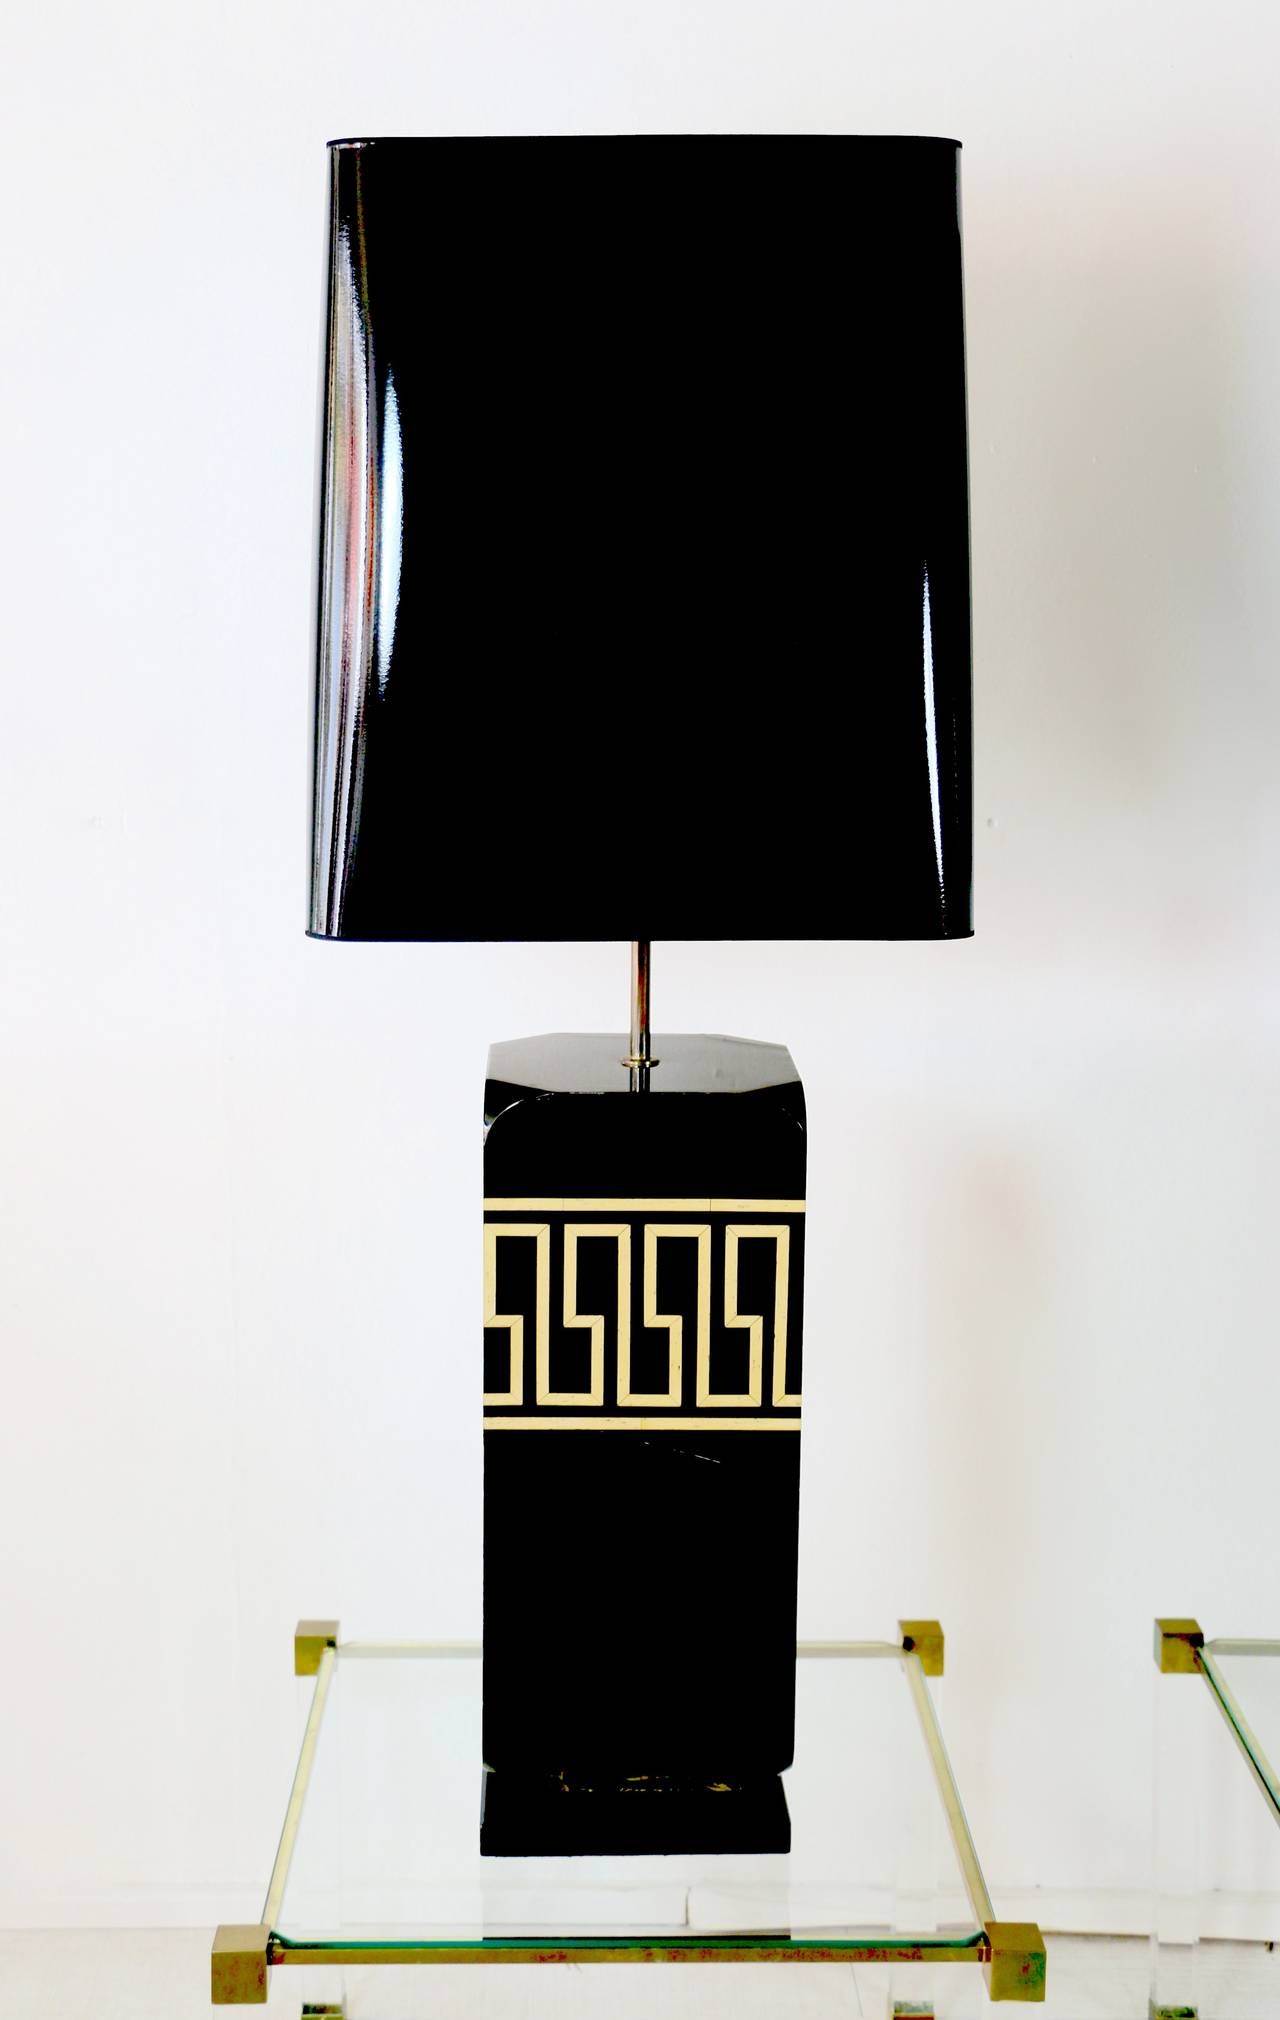 Large 1970s black lacquer table lamps in the style of Jansen. Greek inspiration patterns. New lampshade redone according to the original.

Base dimension: Height 60,5cm x Length 24cm x Depth 24cm
Adjustable lampshade height.